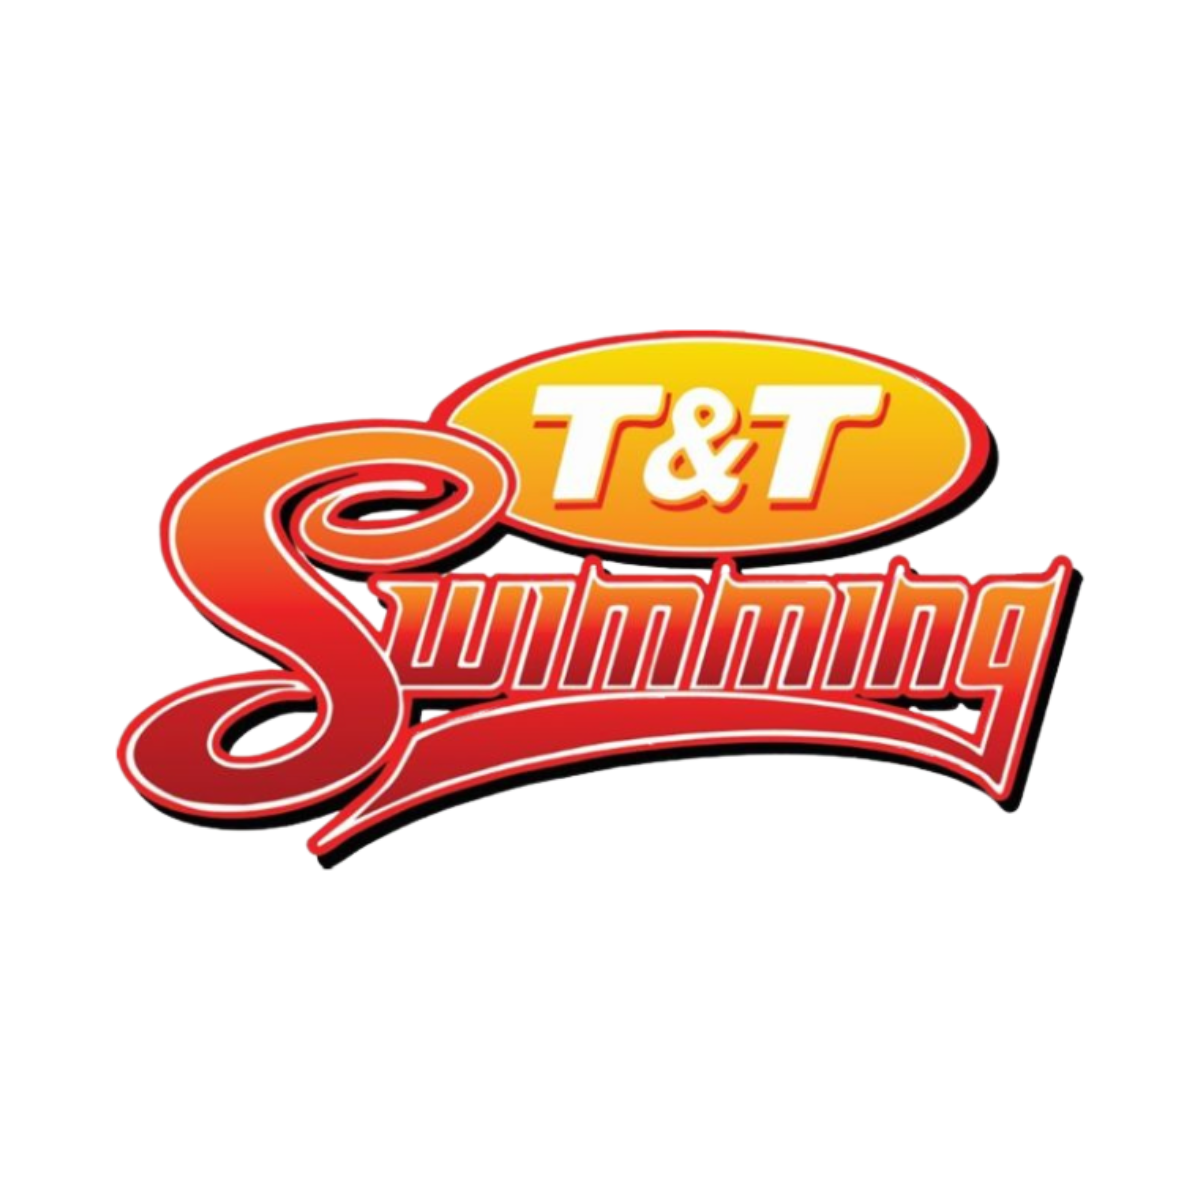 T & t swimming logo on a white background